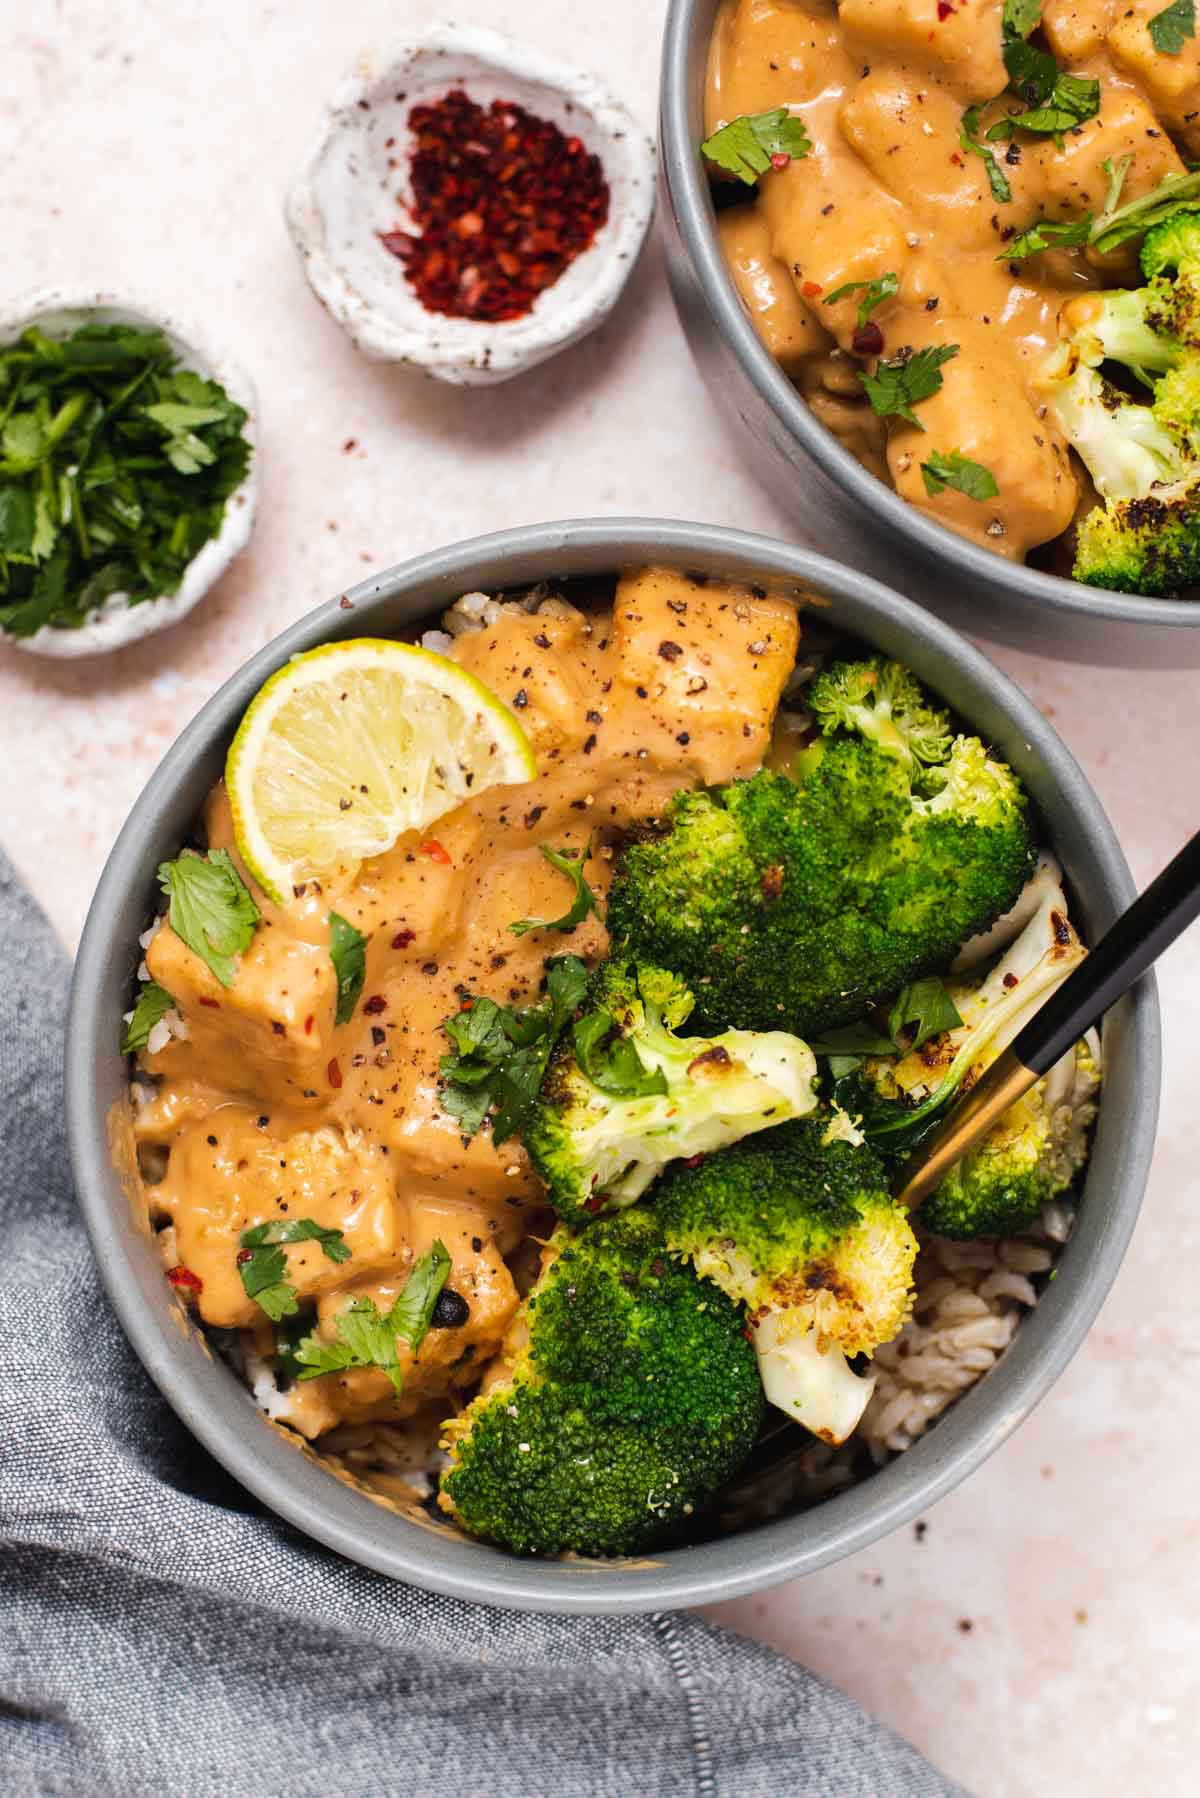 Overhead view of gray bowl filled with peanut tofu, broccoli and a lime wedge